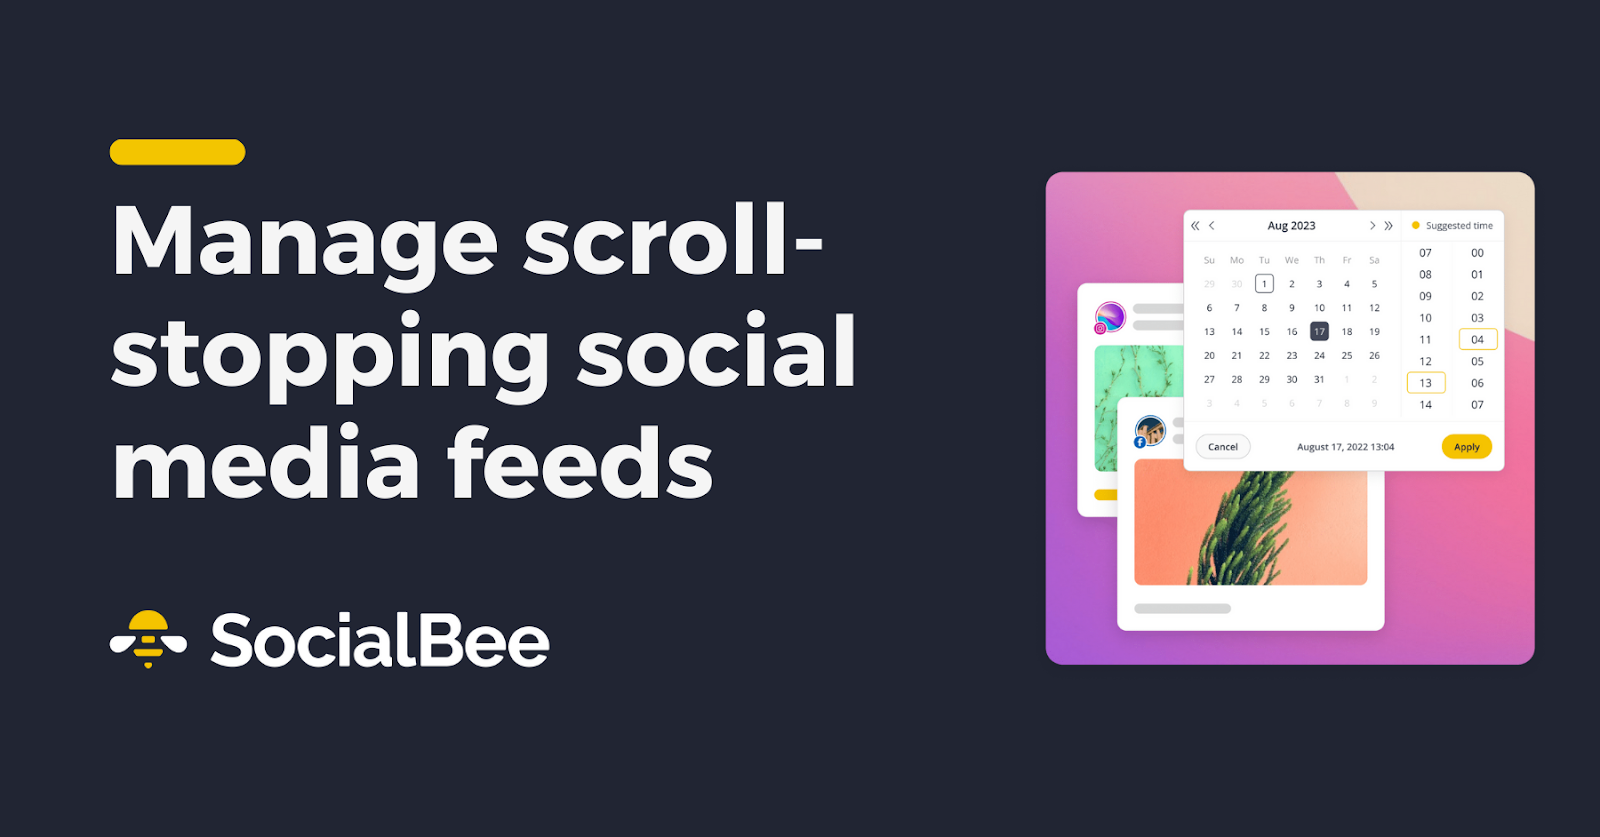 SocialBee's banner showcasing their content scheduling tool. There's a slogan saying "Manage scroll-stopping social media feeds"